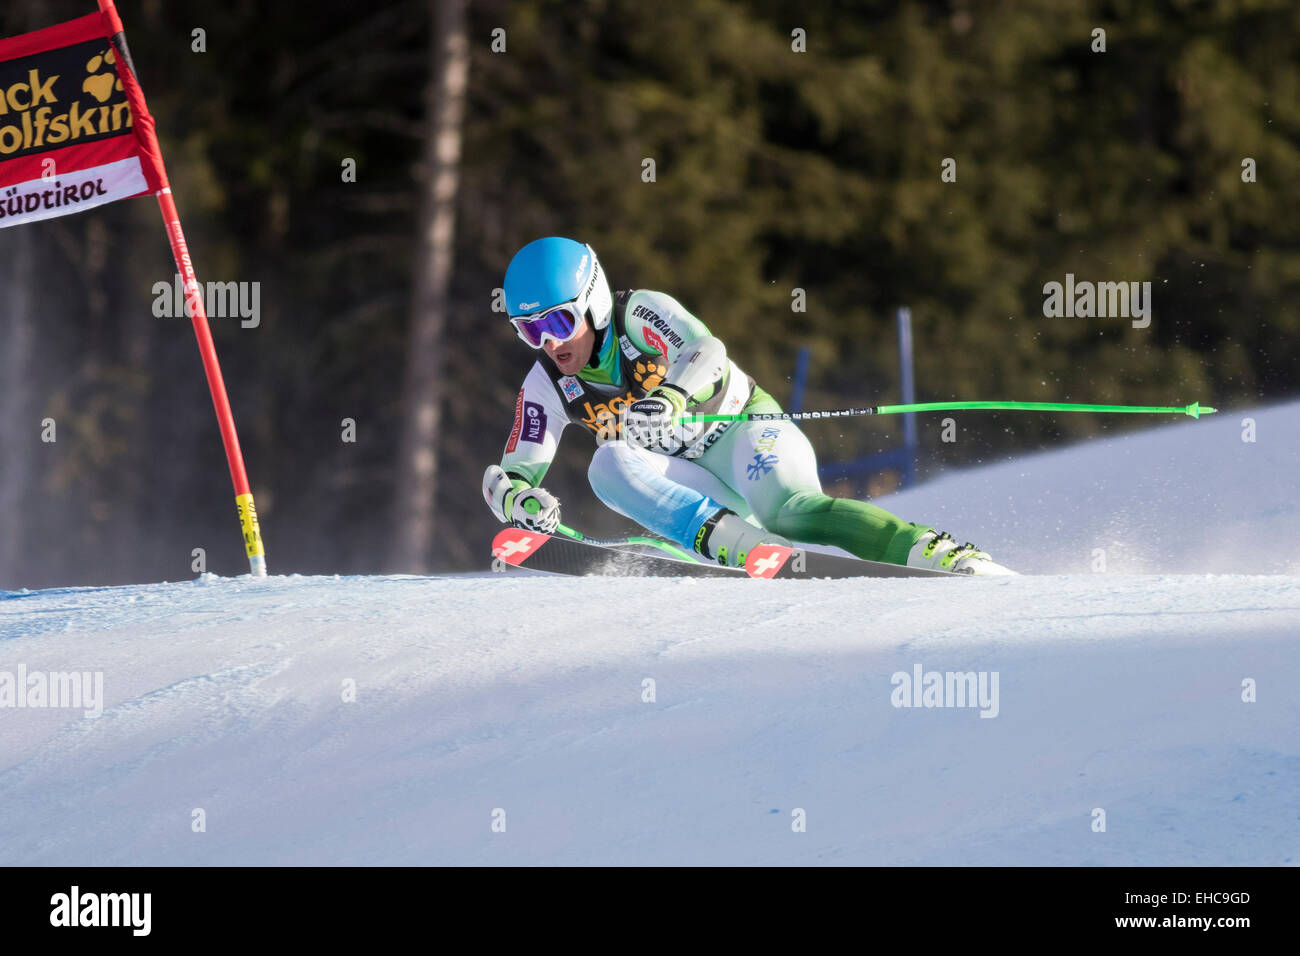 Val Gardena, Italy 20 December 2014. PERKO Rok (Slo) competing in the Audi FIS Alpine Skiing World Cup Super-G race Stock Photo